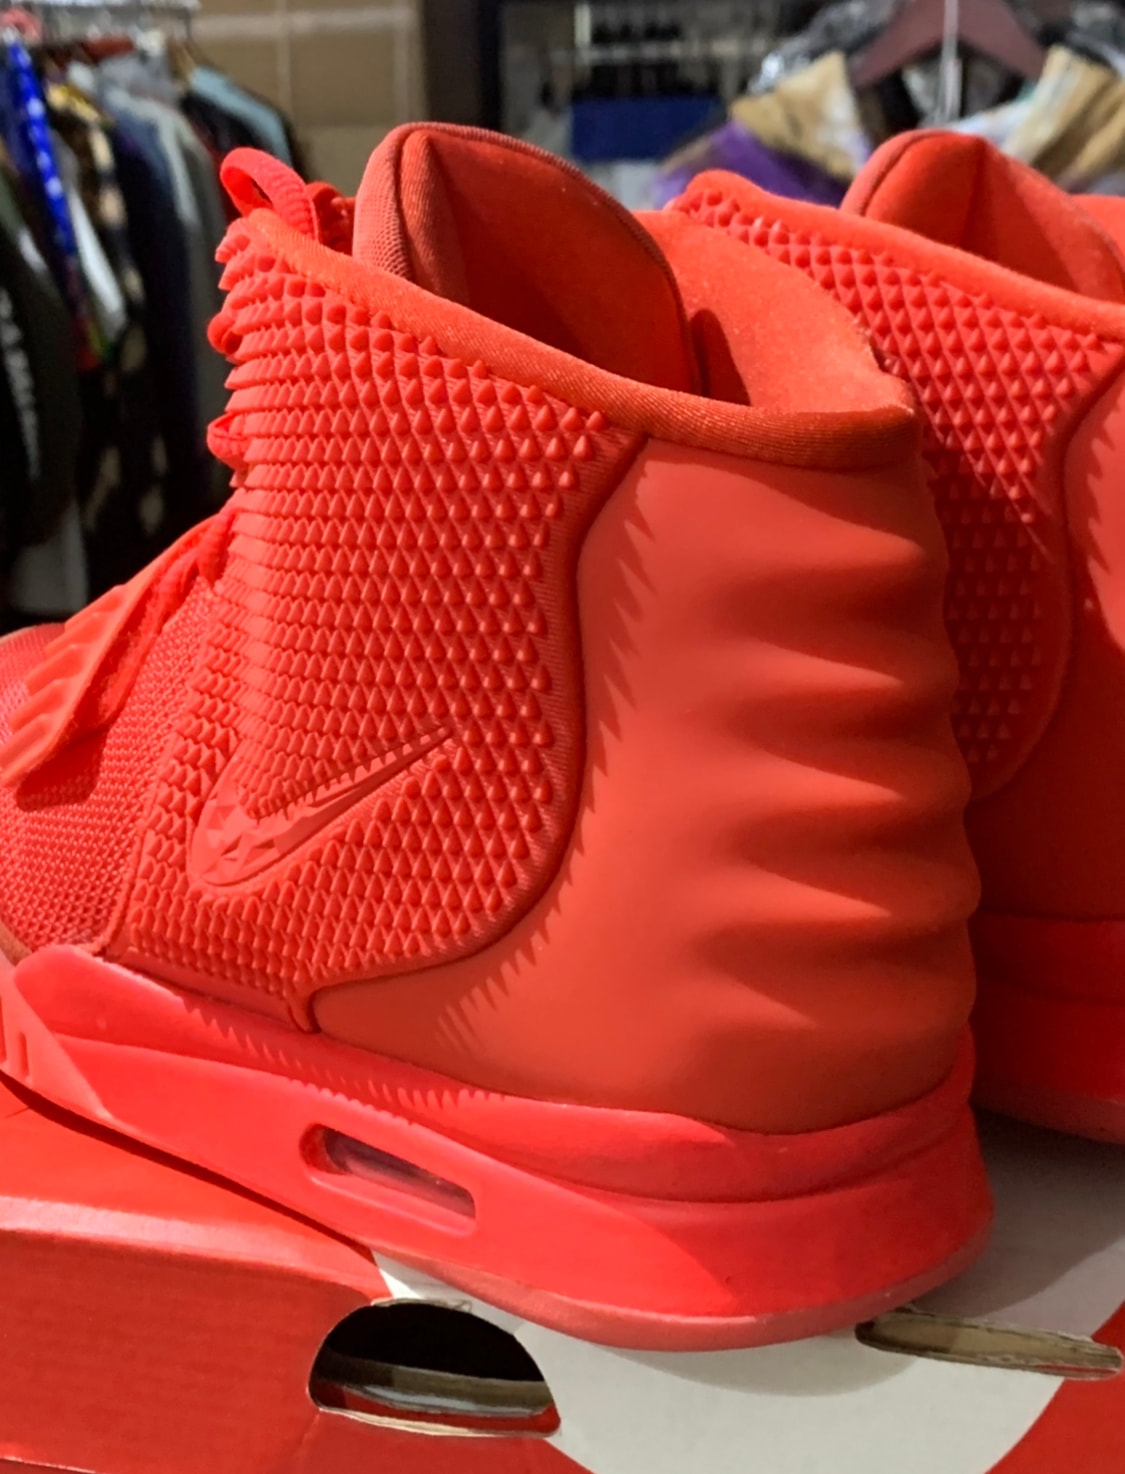 red october nike air yeezy 2's